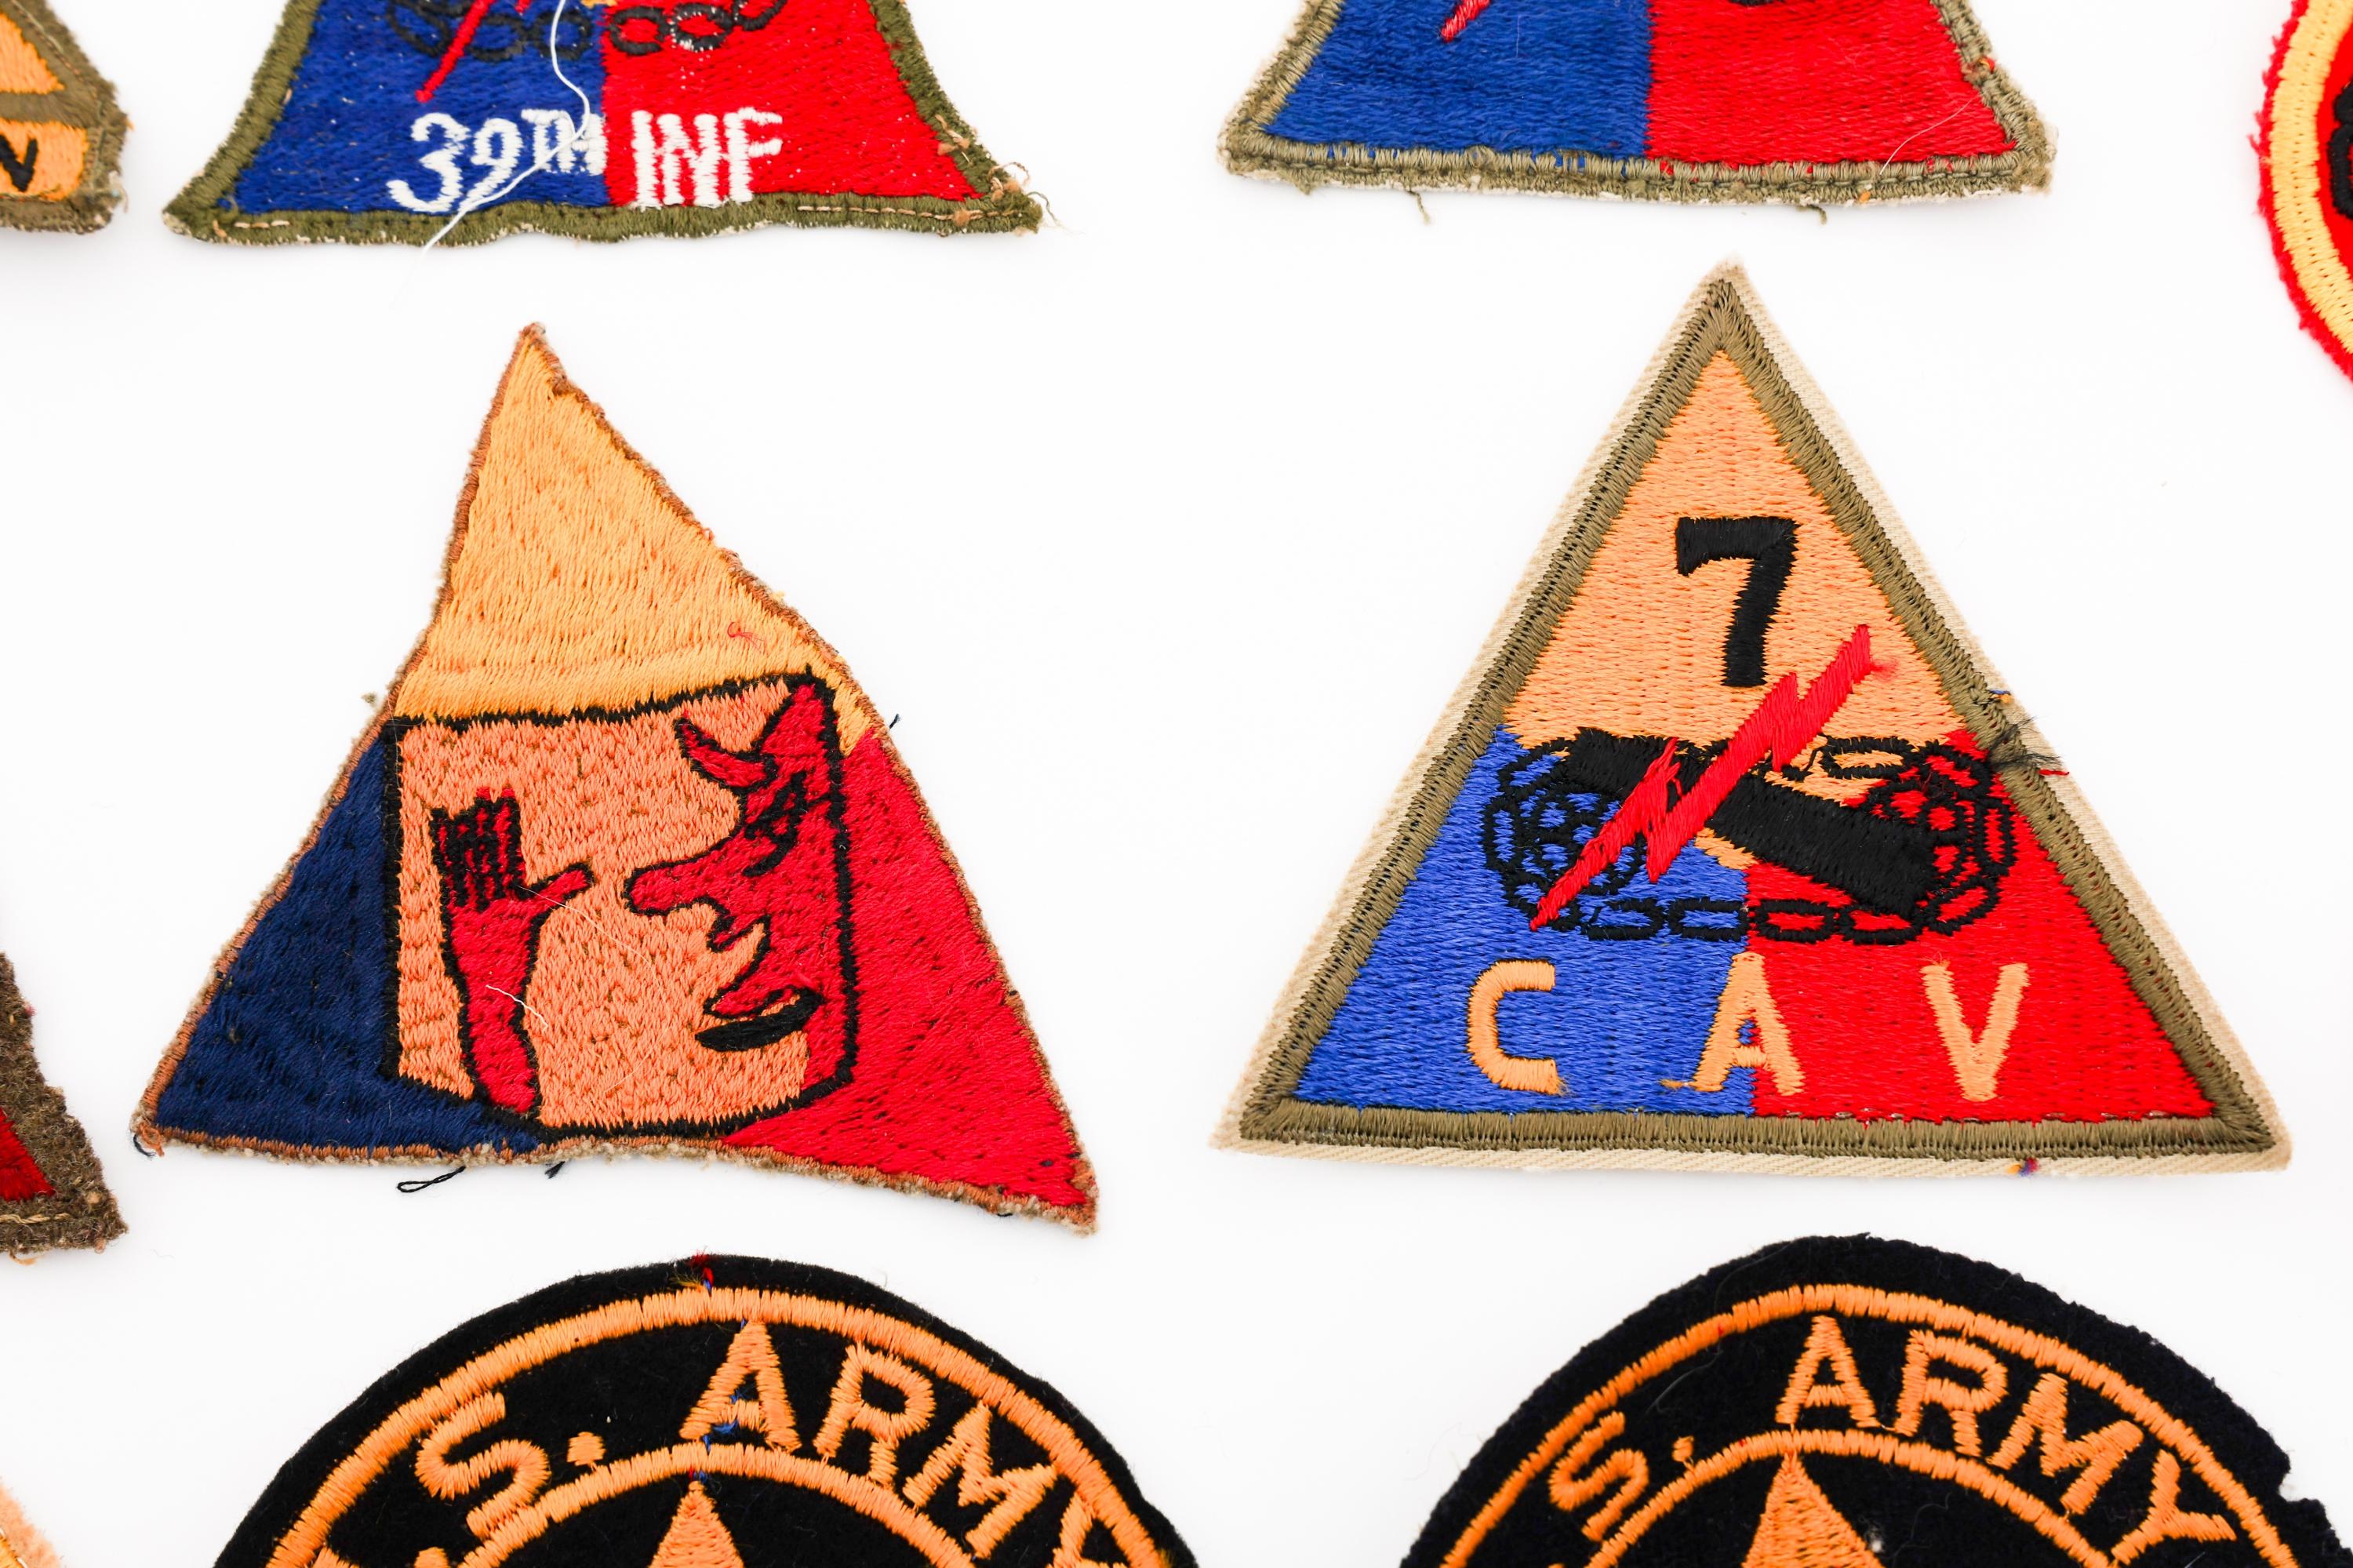 WWII - COLD WAR US ARMY ARMORED UNIT PATCHES